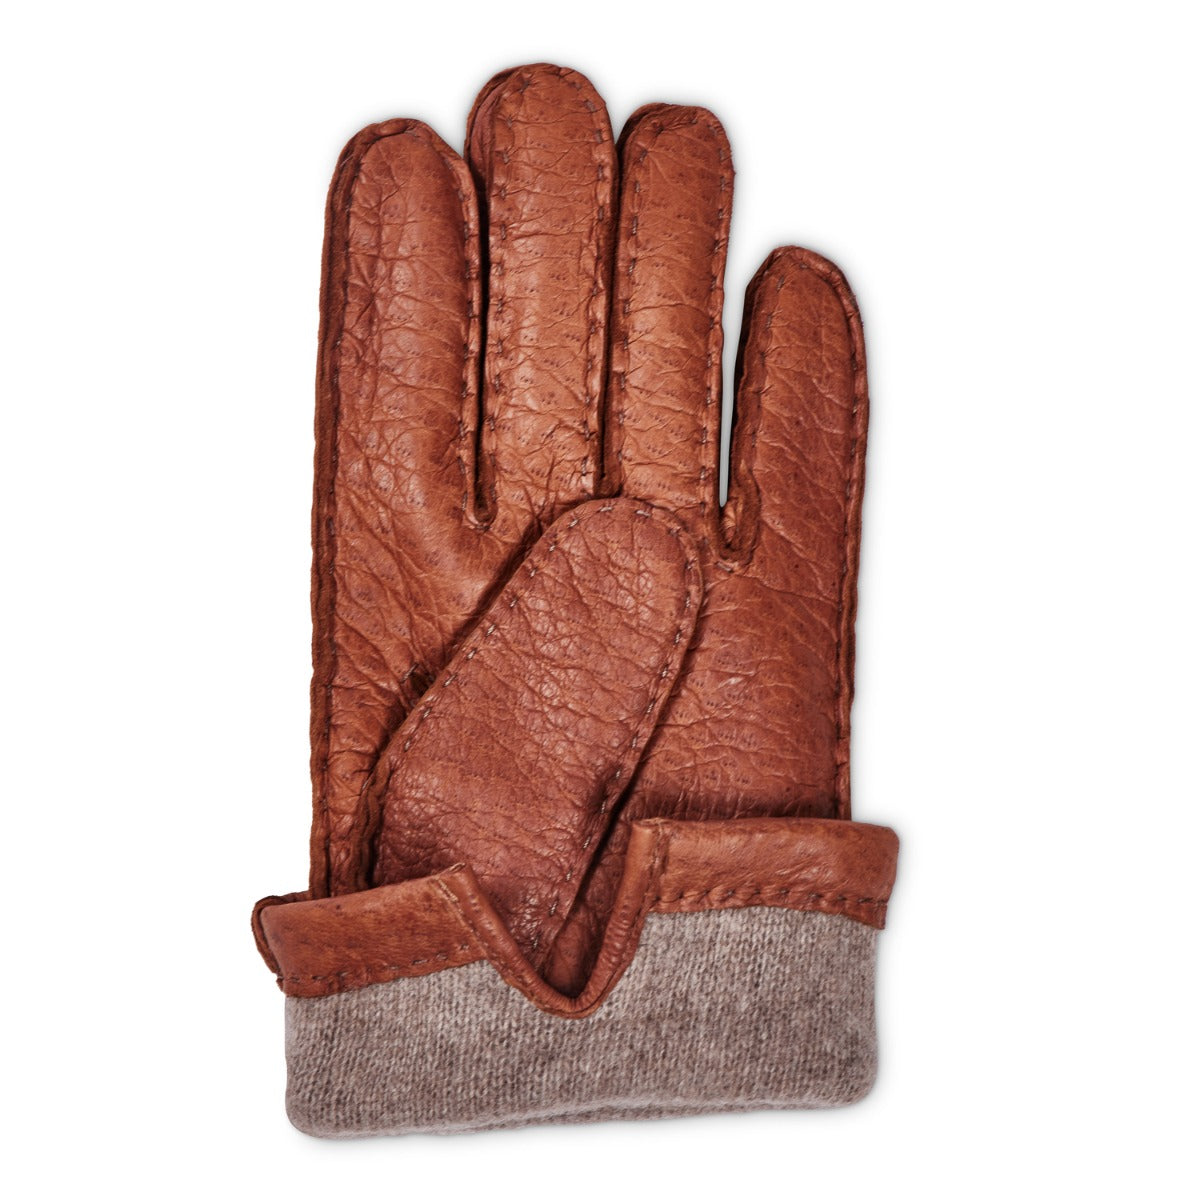 Sovereign Grade Medium Brown Peccary Leather Gloves, Cashmere Lined